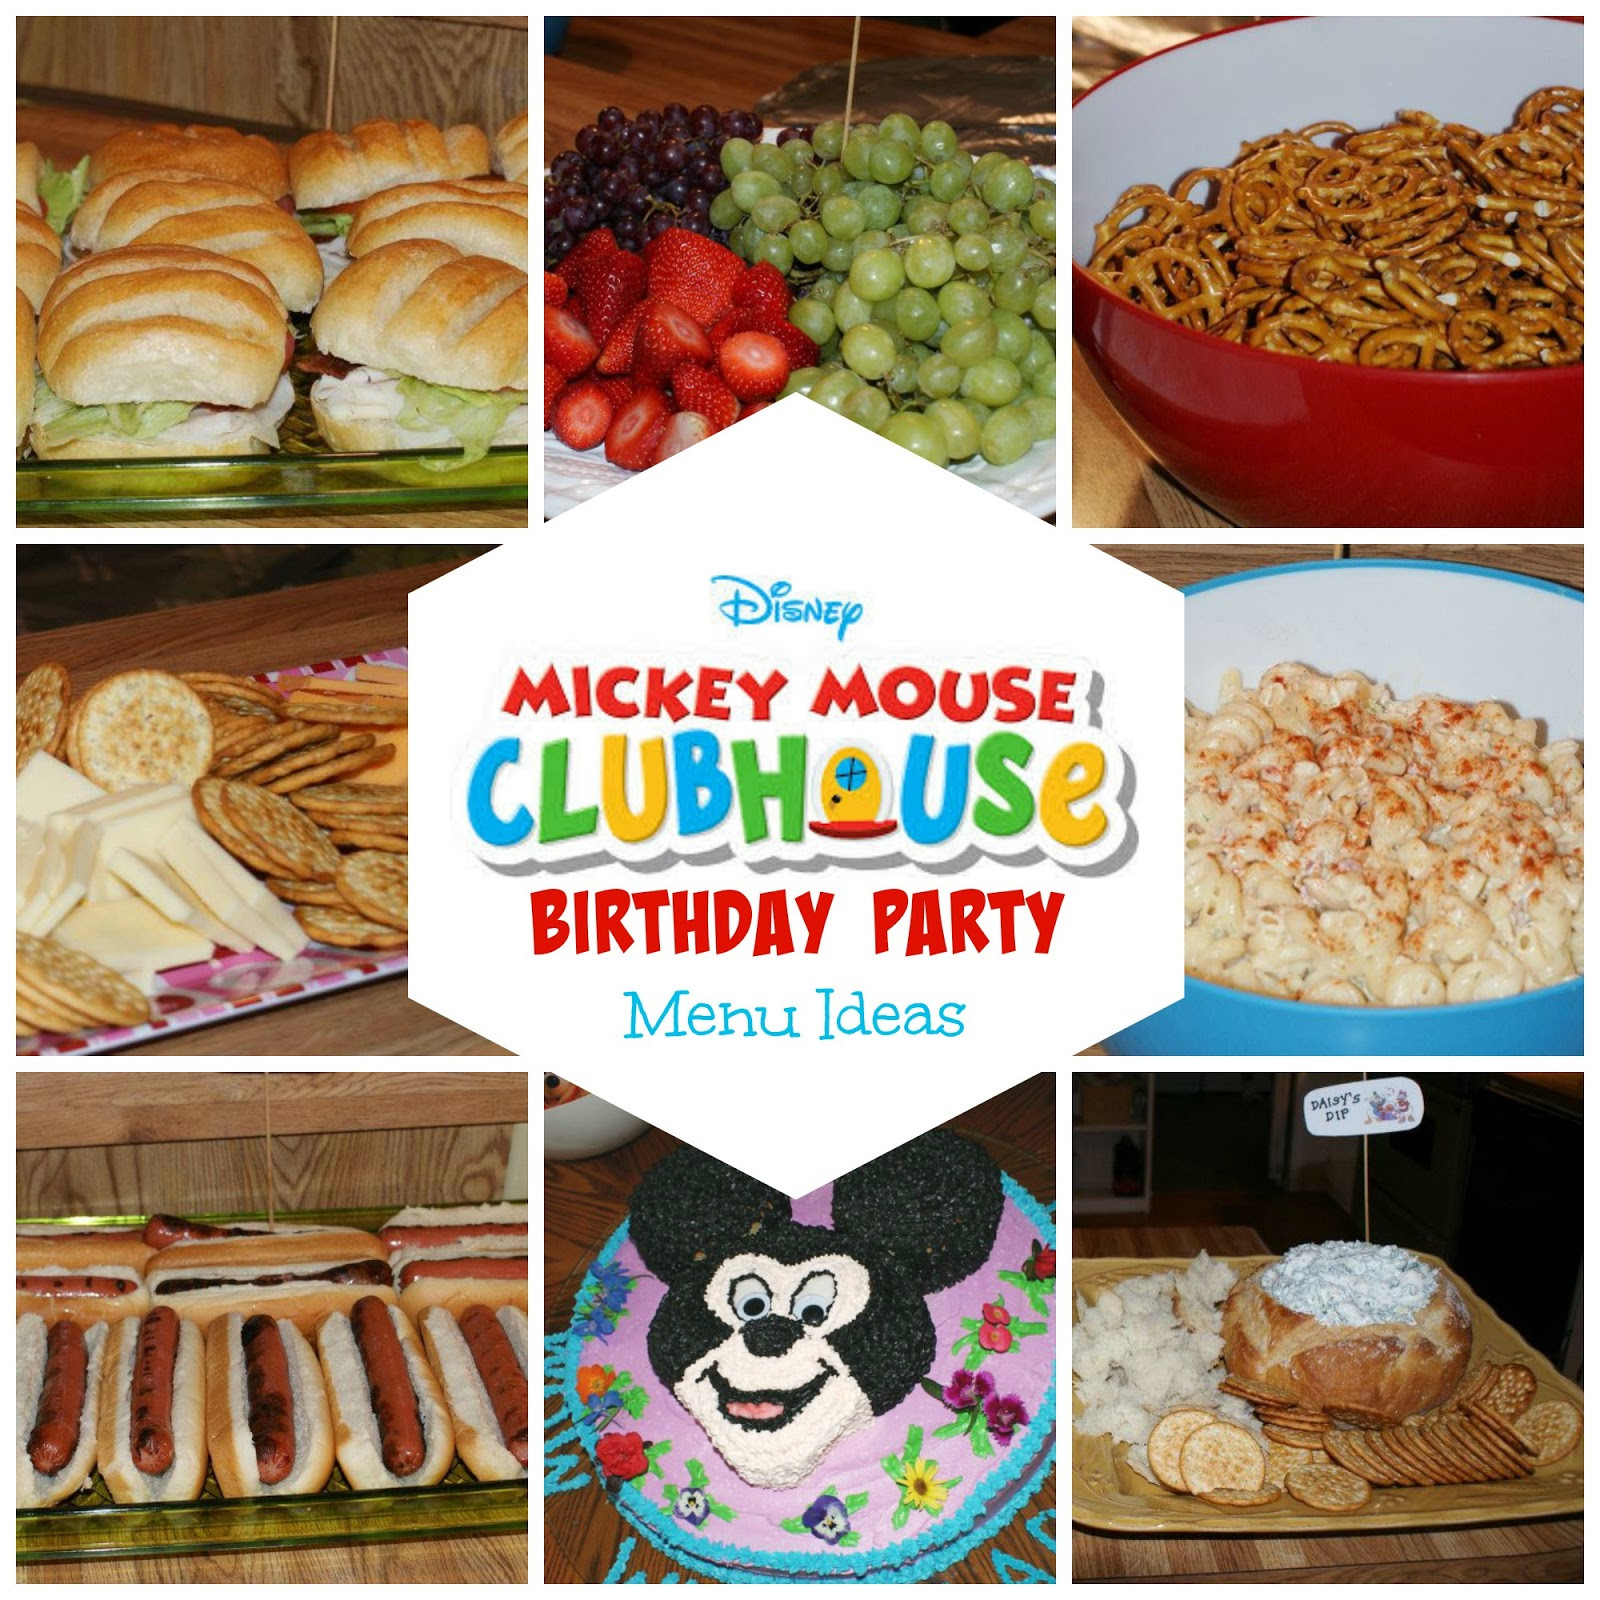 Mickey Mouse Birthday Party Ideas
 8 Mickey Mouse Birthday Party Menu Ideas